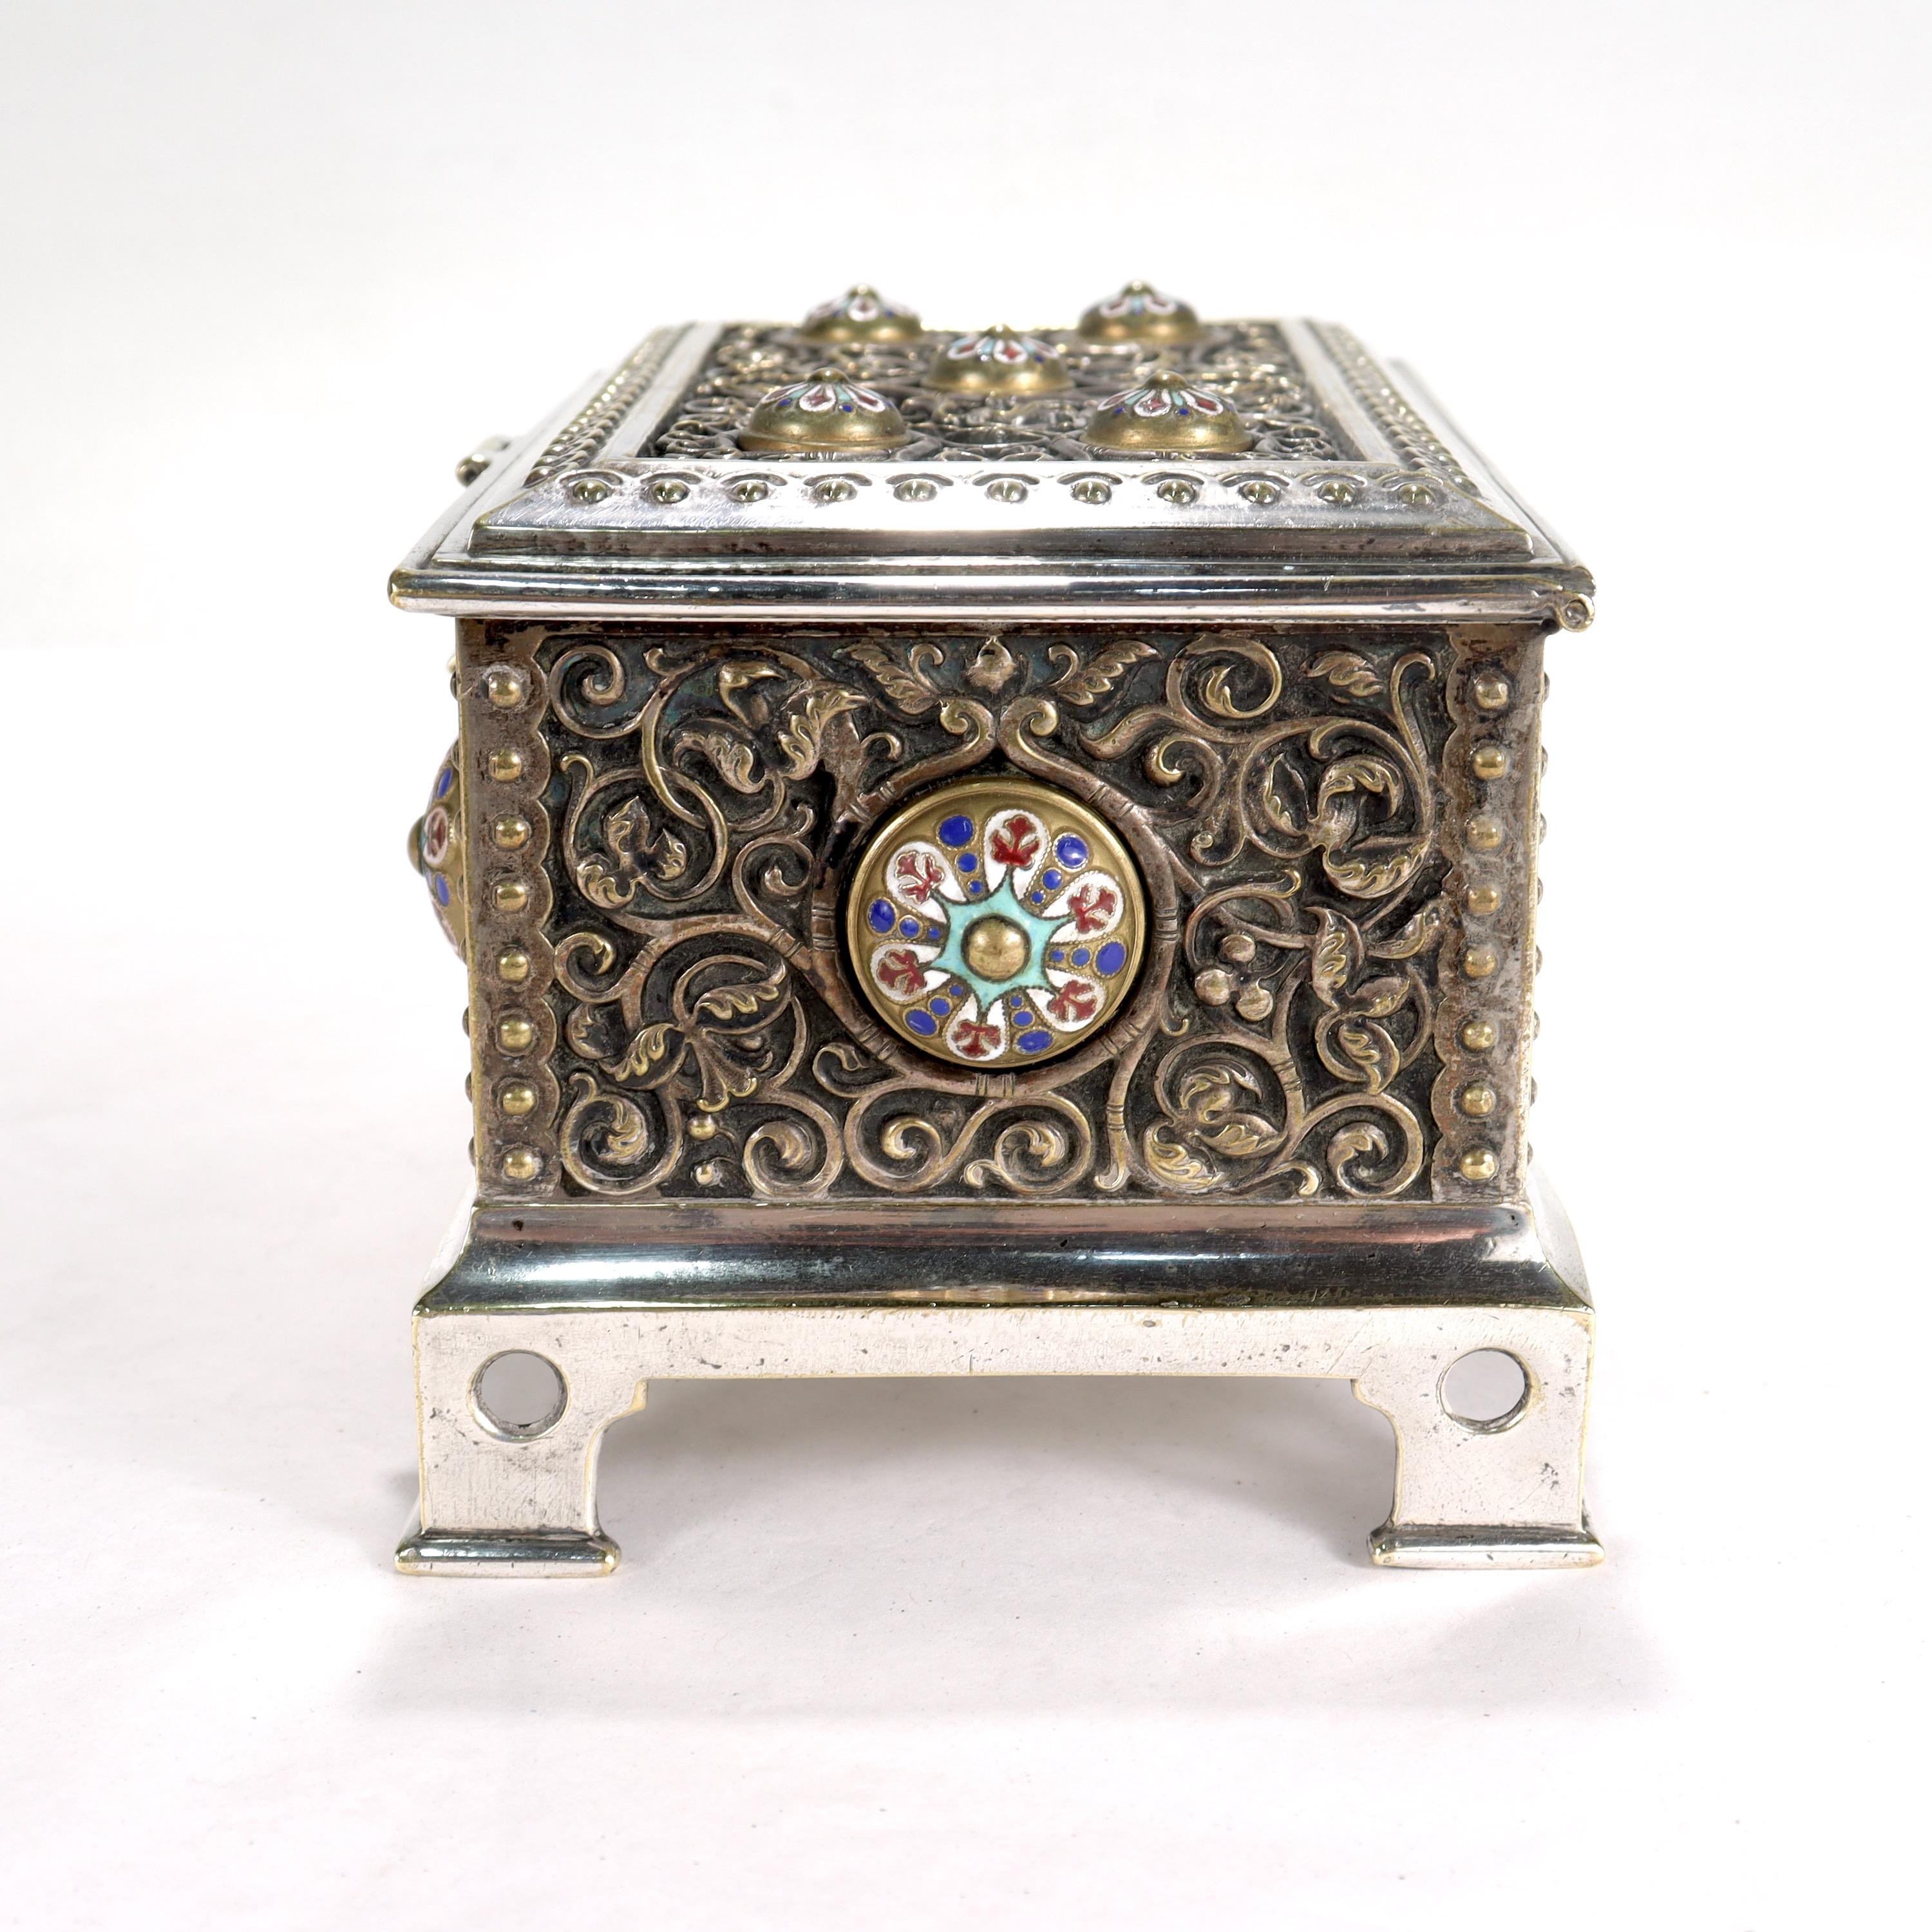 Women's or Men's Antique Silver Plated & Enameled Table Box or Casket in the Russian Taste For Sale